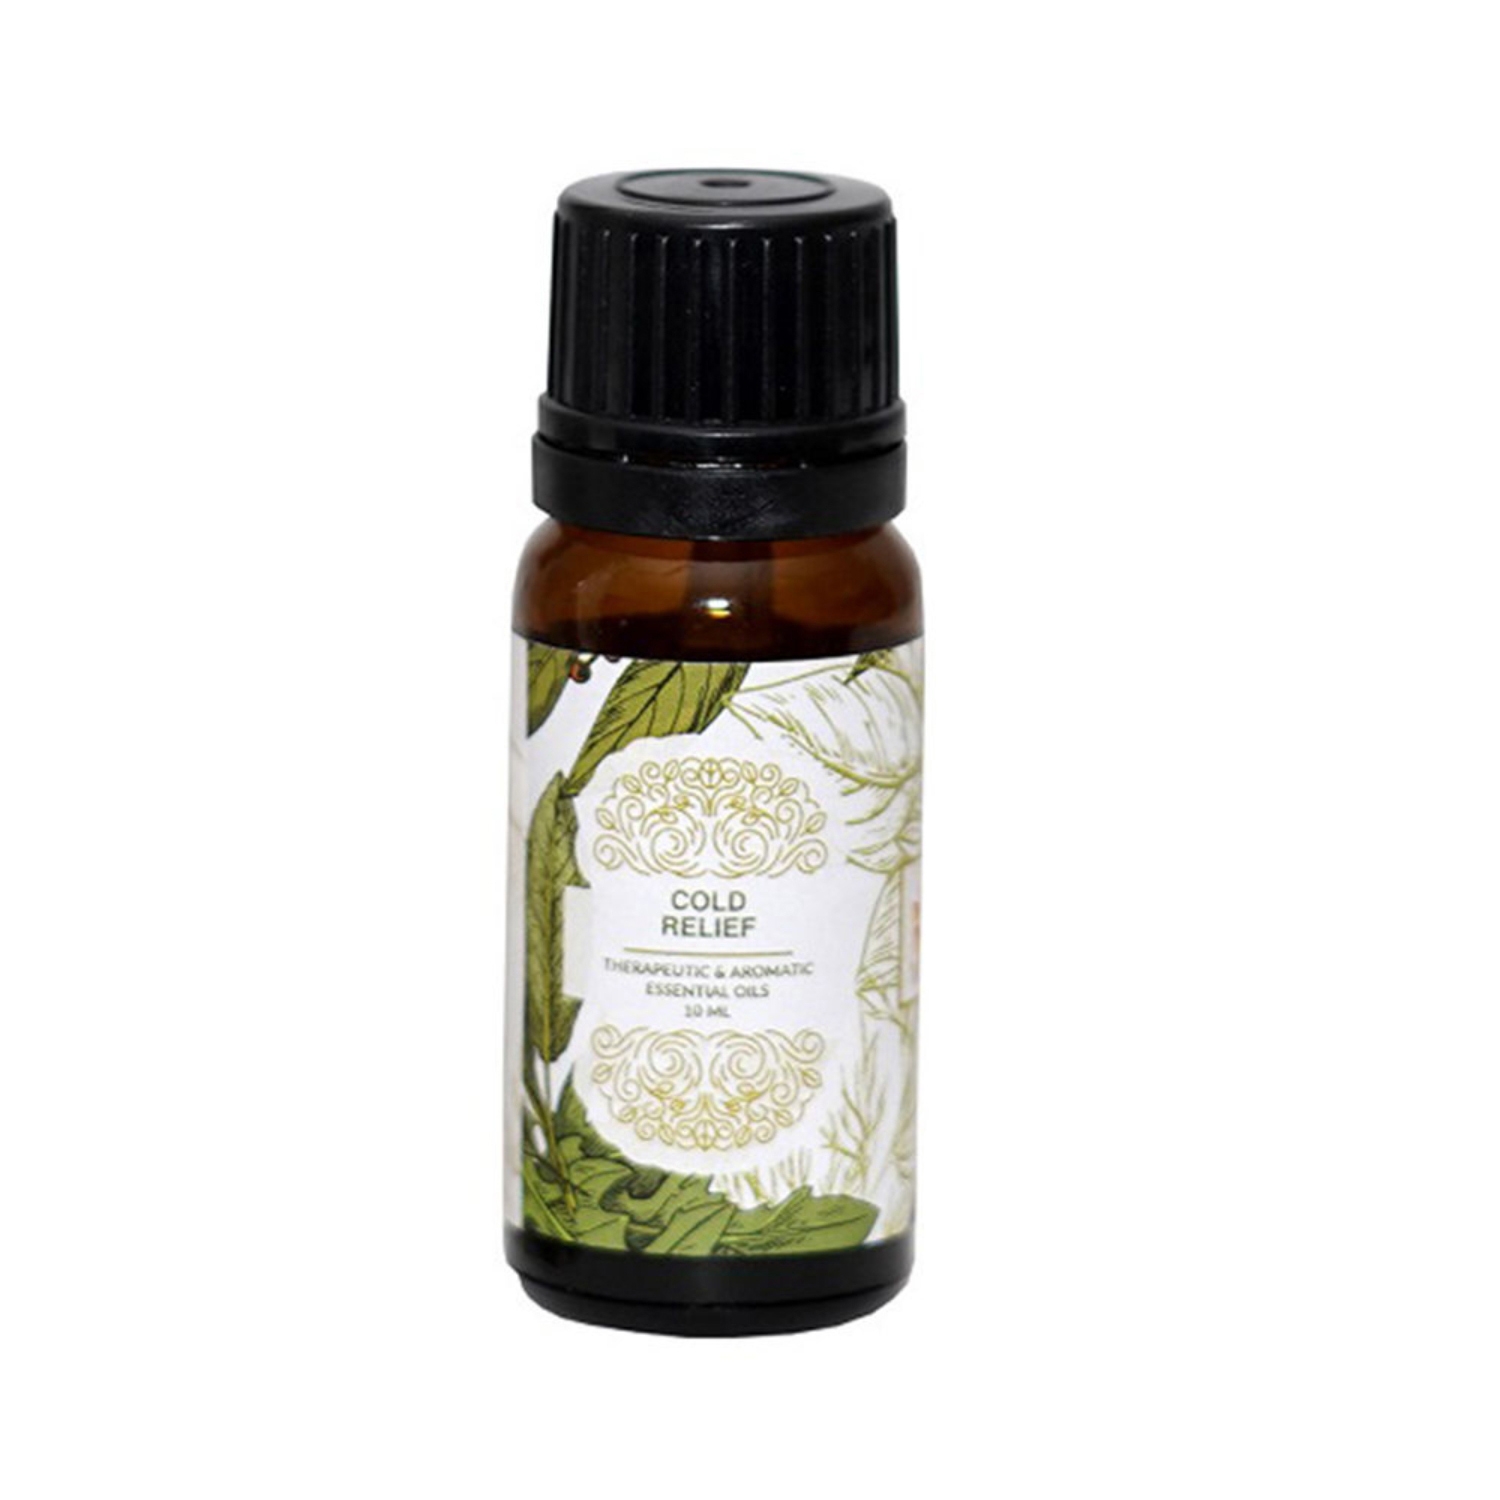 Vrindaam Cold Relief Essential Oil (10ml)